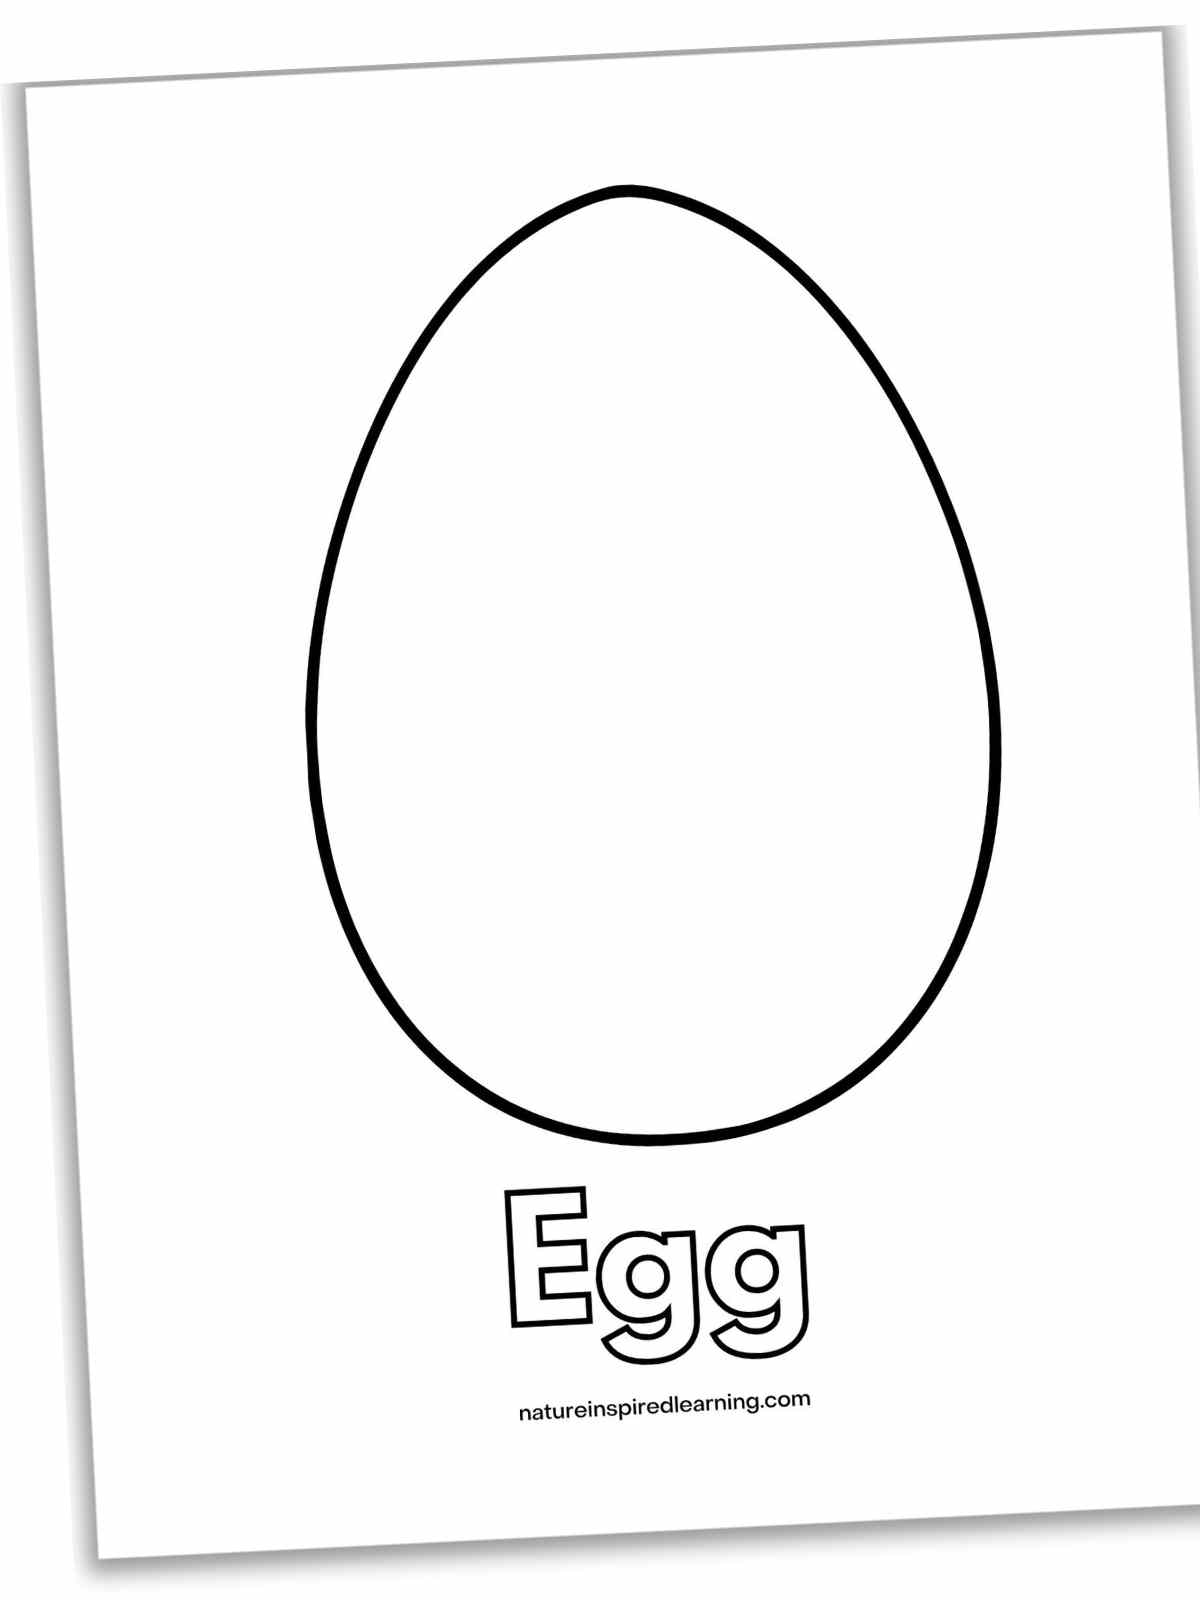 large plain egg with Egg written below in outline form